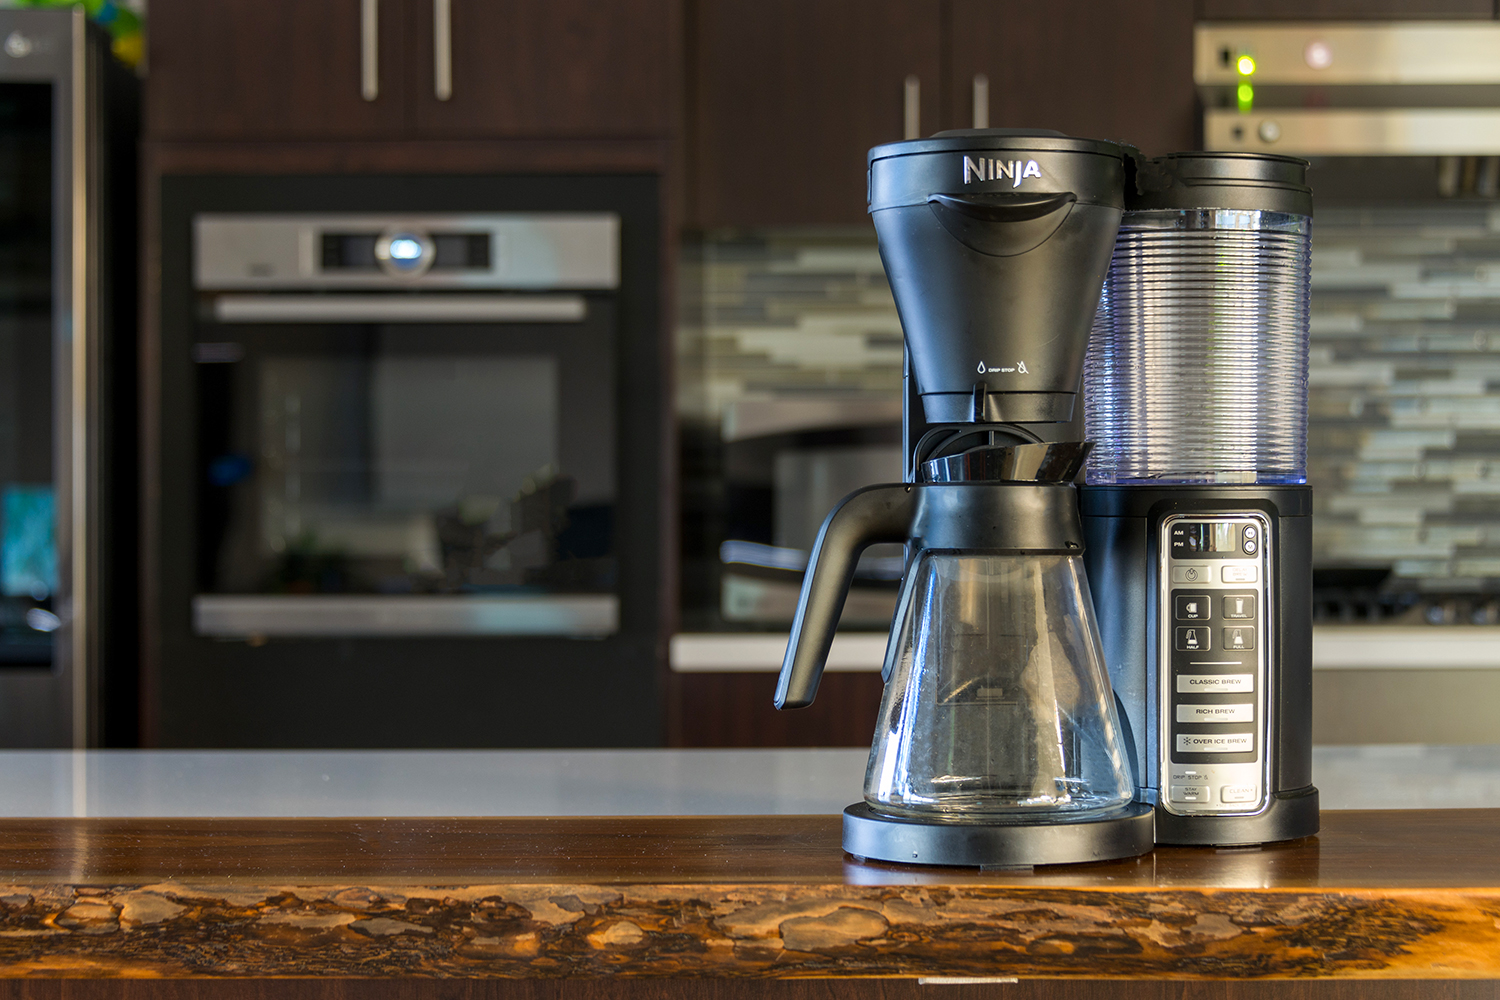 Best Ninja Coffee Maker Models: Old and New